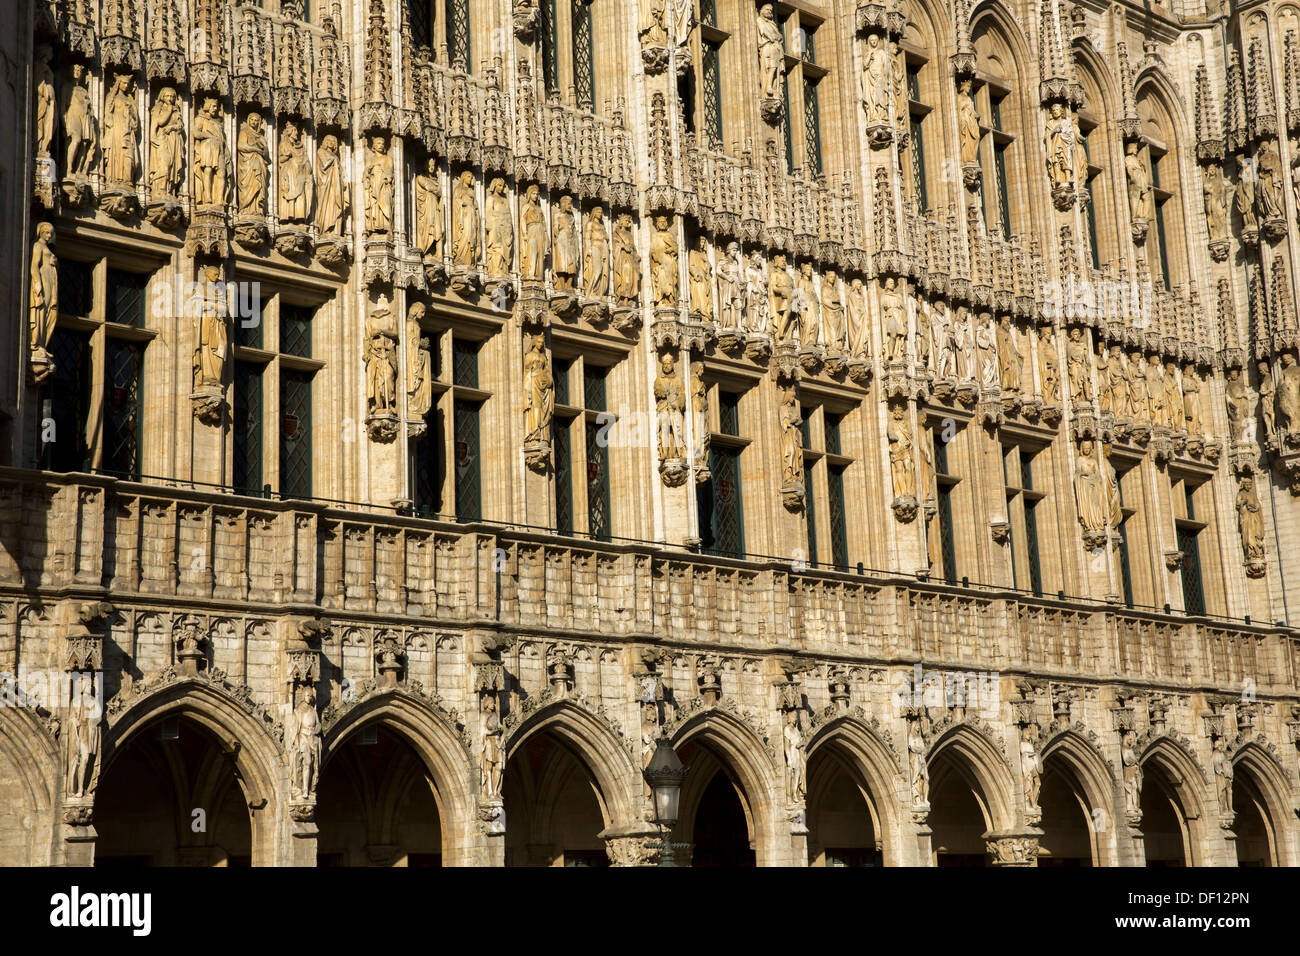 Ornate carved figures adorn the facade of the Hotel de Ville in Brussels. Stock Photo